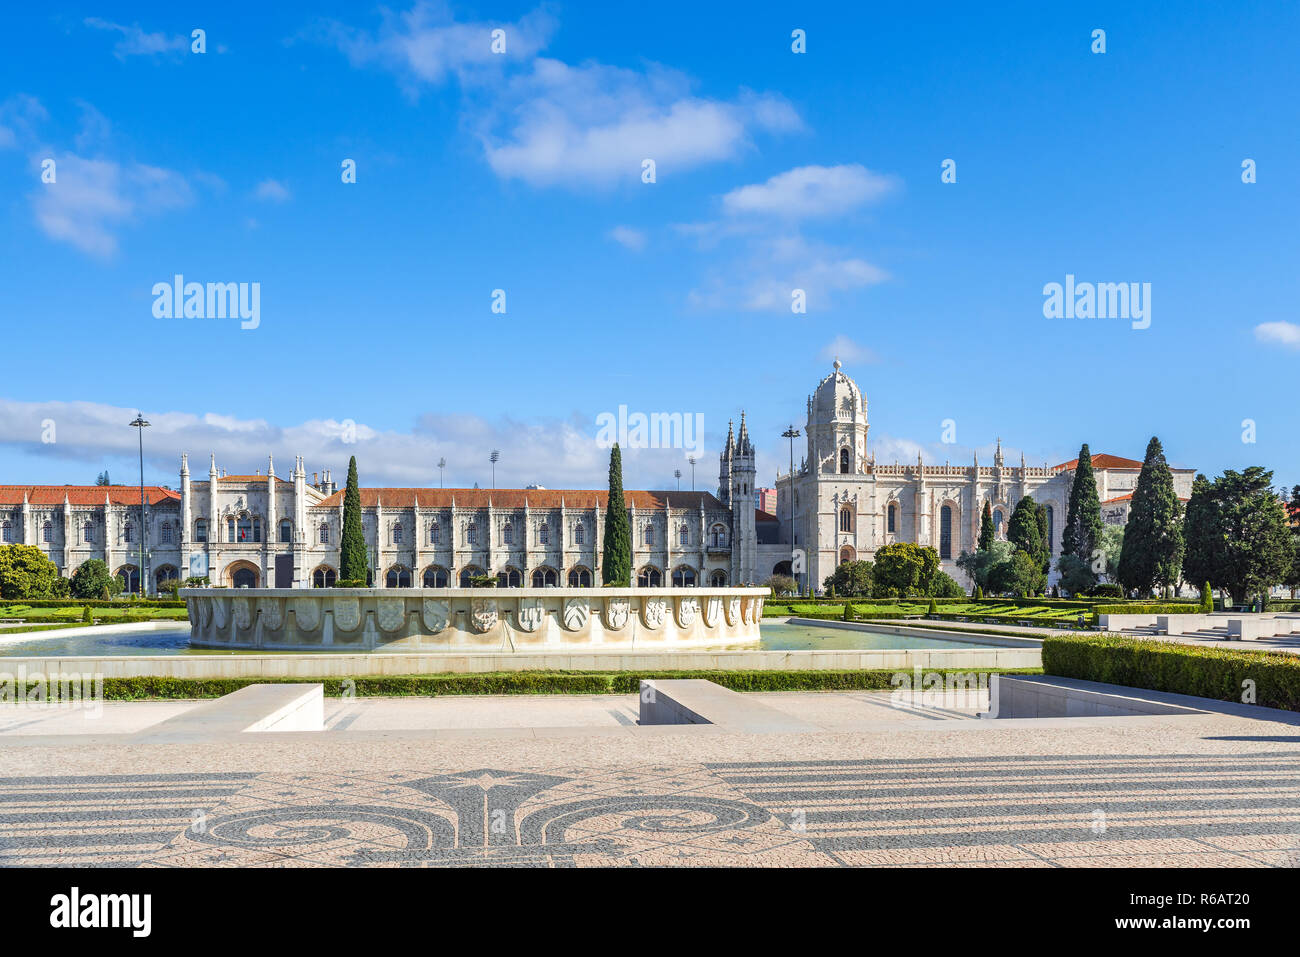 Hieronymites Monastery or Jeronimos is located in Belem in Lisbon, Portugal. travel destination Stock Photo